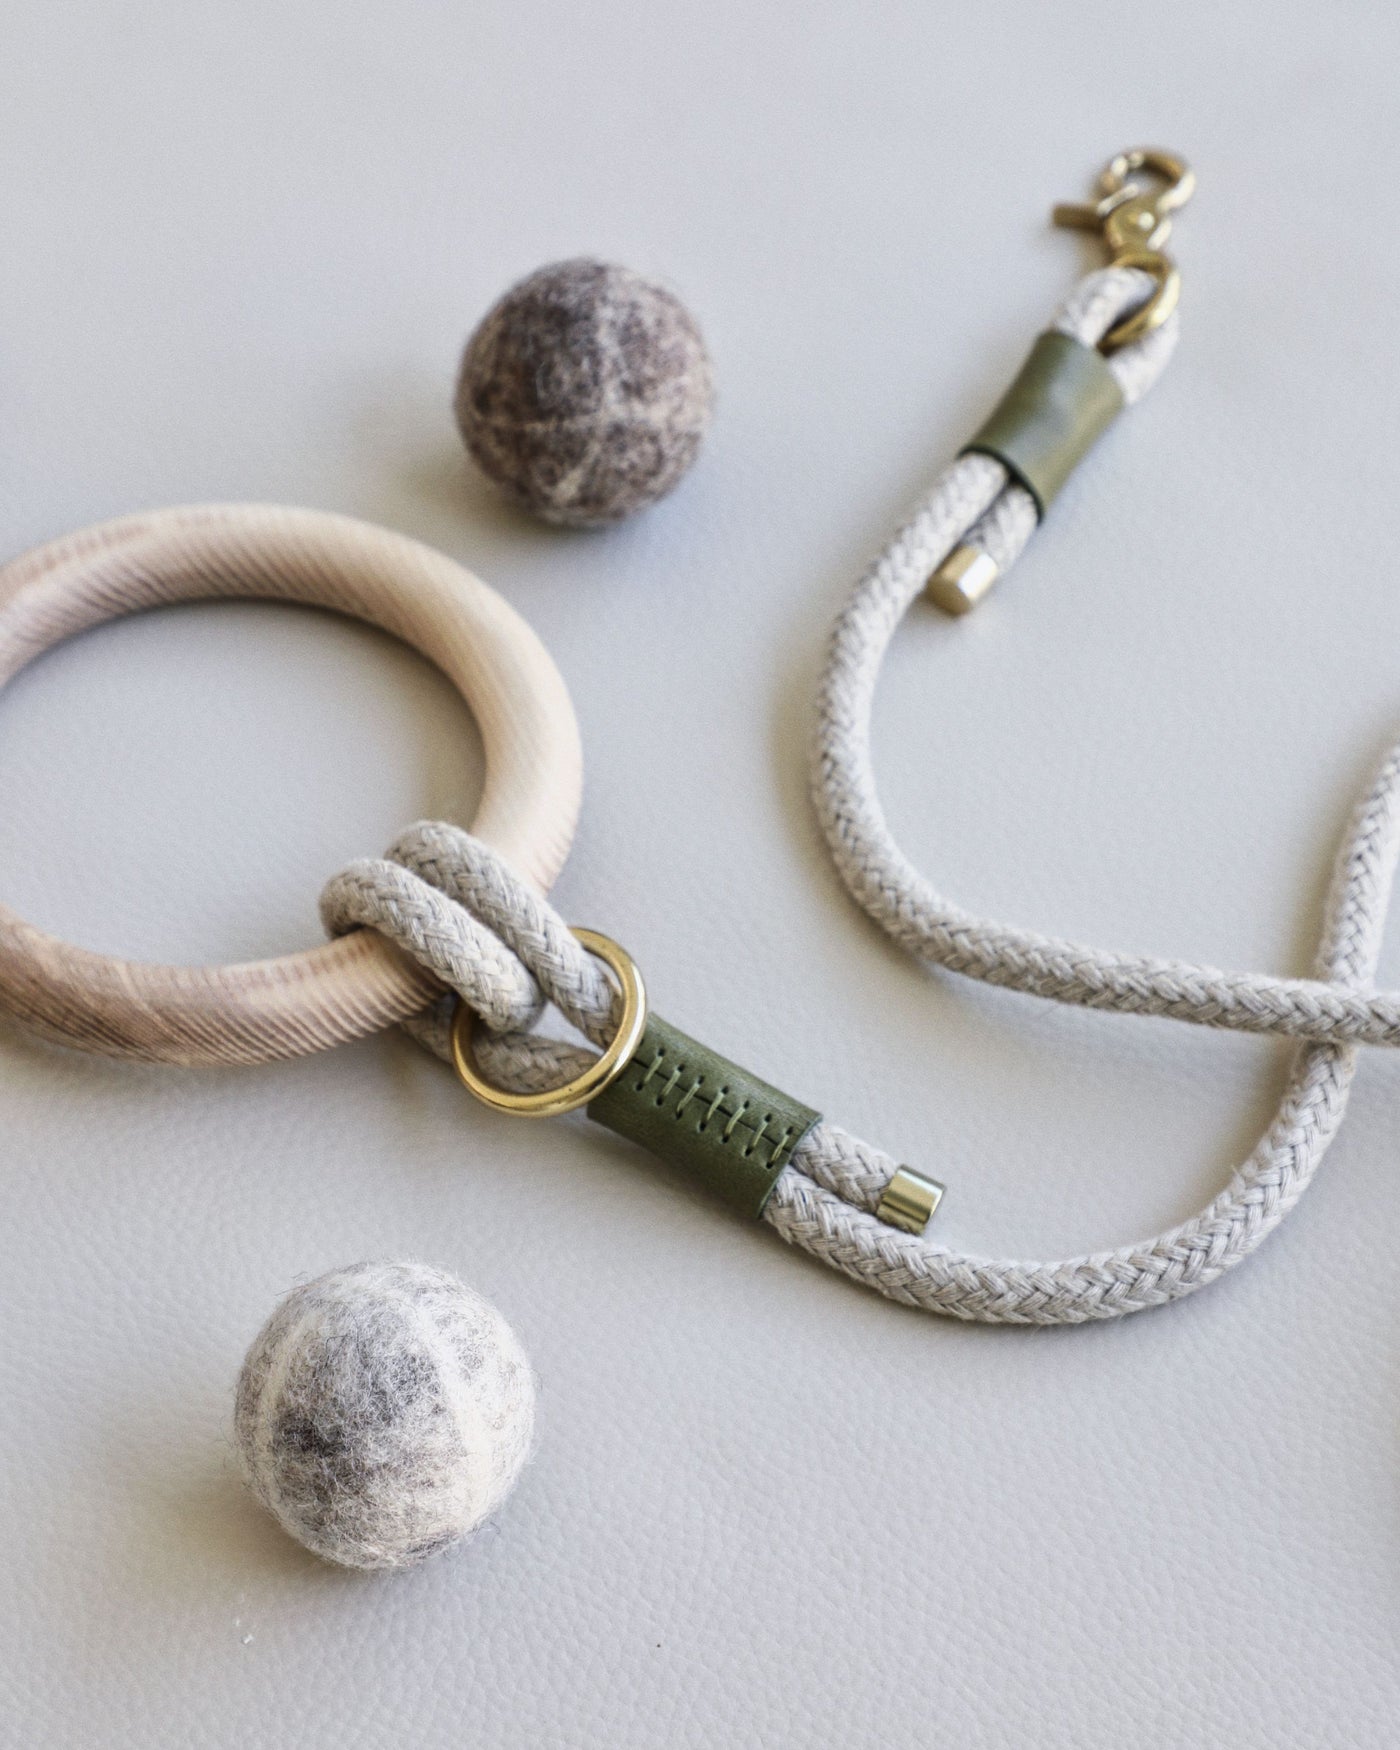 Rope leash connected to round dowel with green leather accents and gold hardware